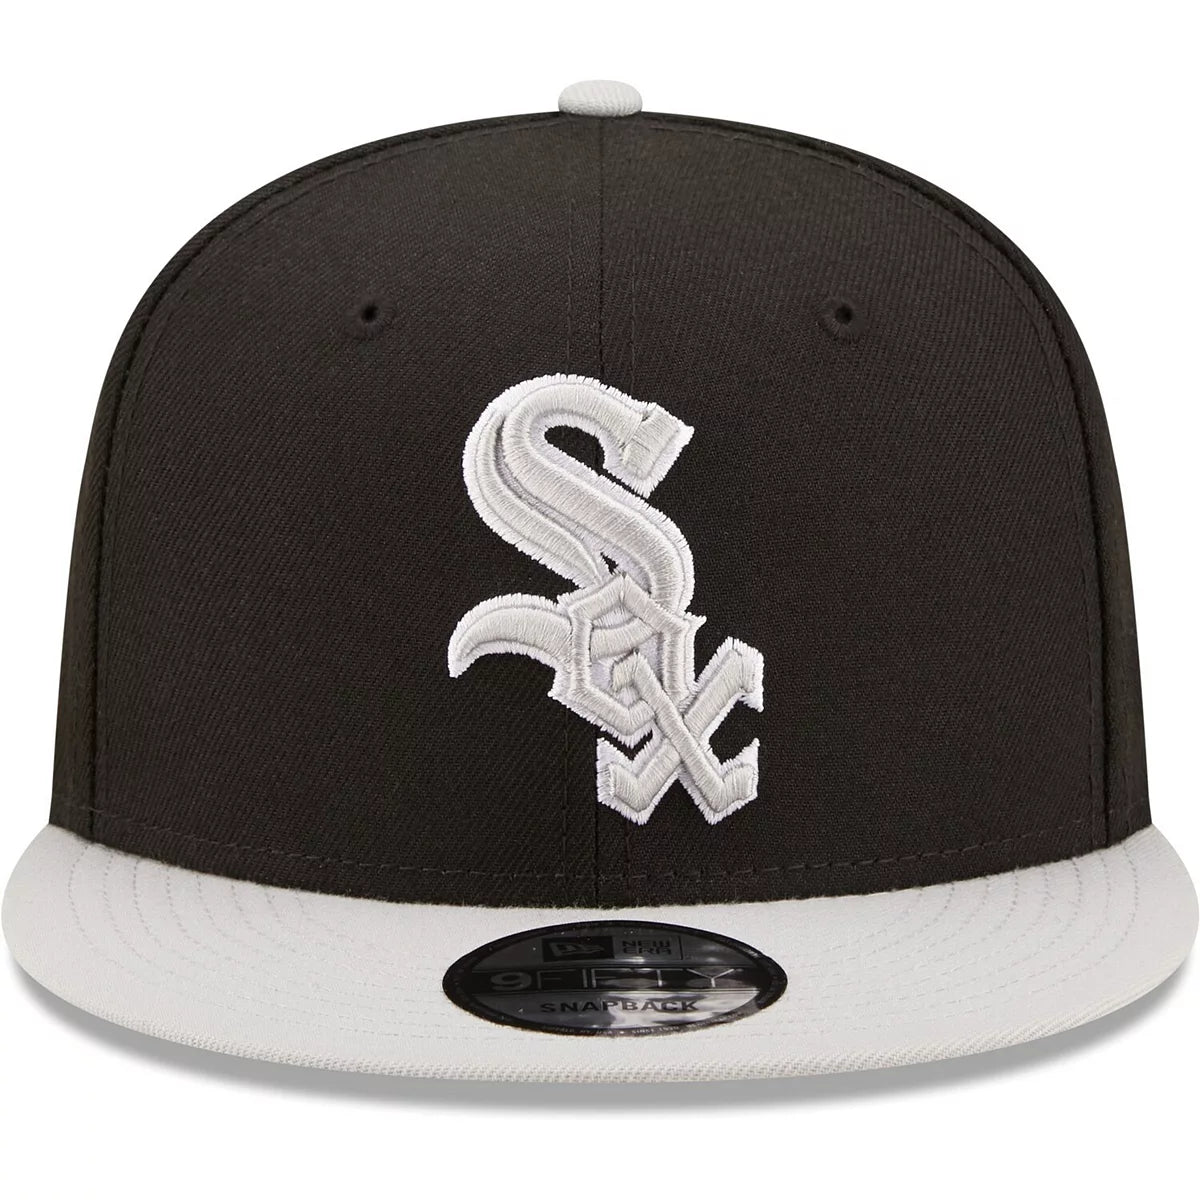 Chicago White Sox New Era Color Pack 9FIFTY SnapBack - Black/White